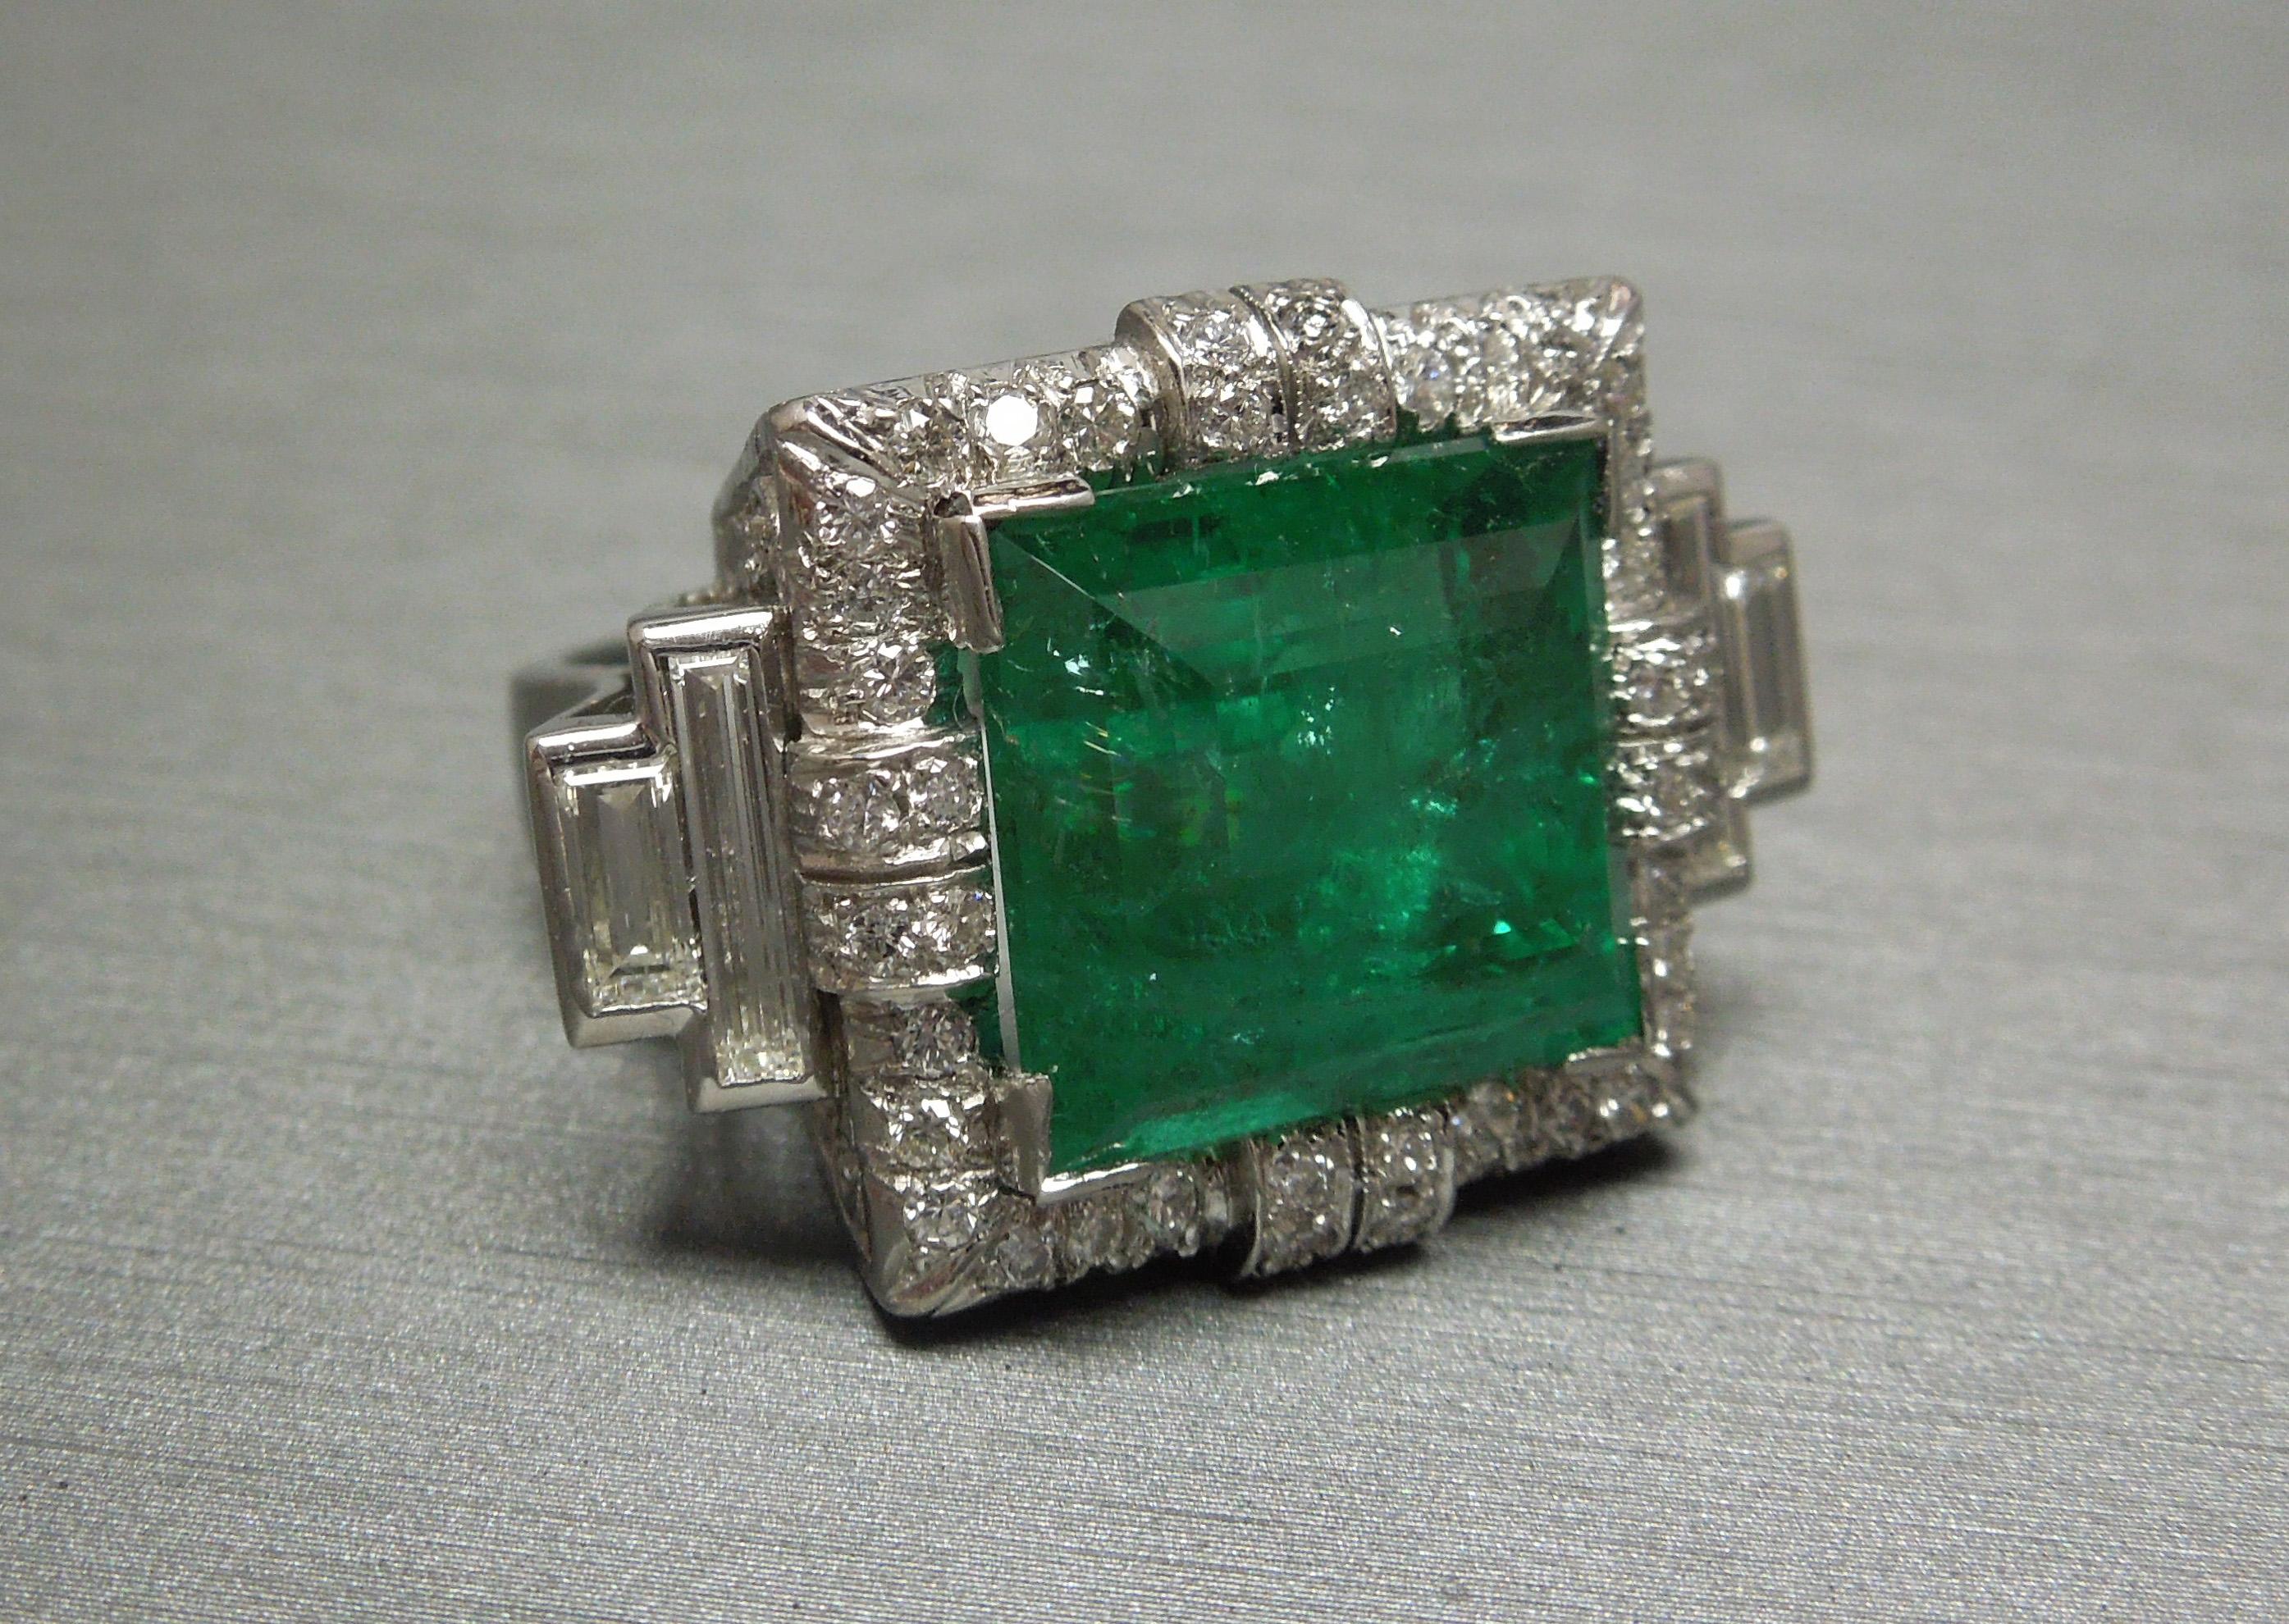 An unparalleled reflection of the Art Deco era, this GIA Certified Colombian Emerald ring possesses every desirable trait of an Art Deco period piece. A central museum / vault quality 12.75 carat vivid green Emerald, well balanced with a total of